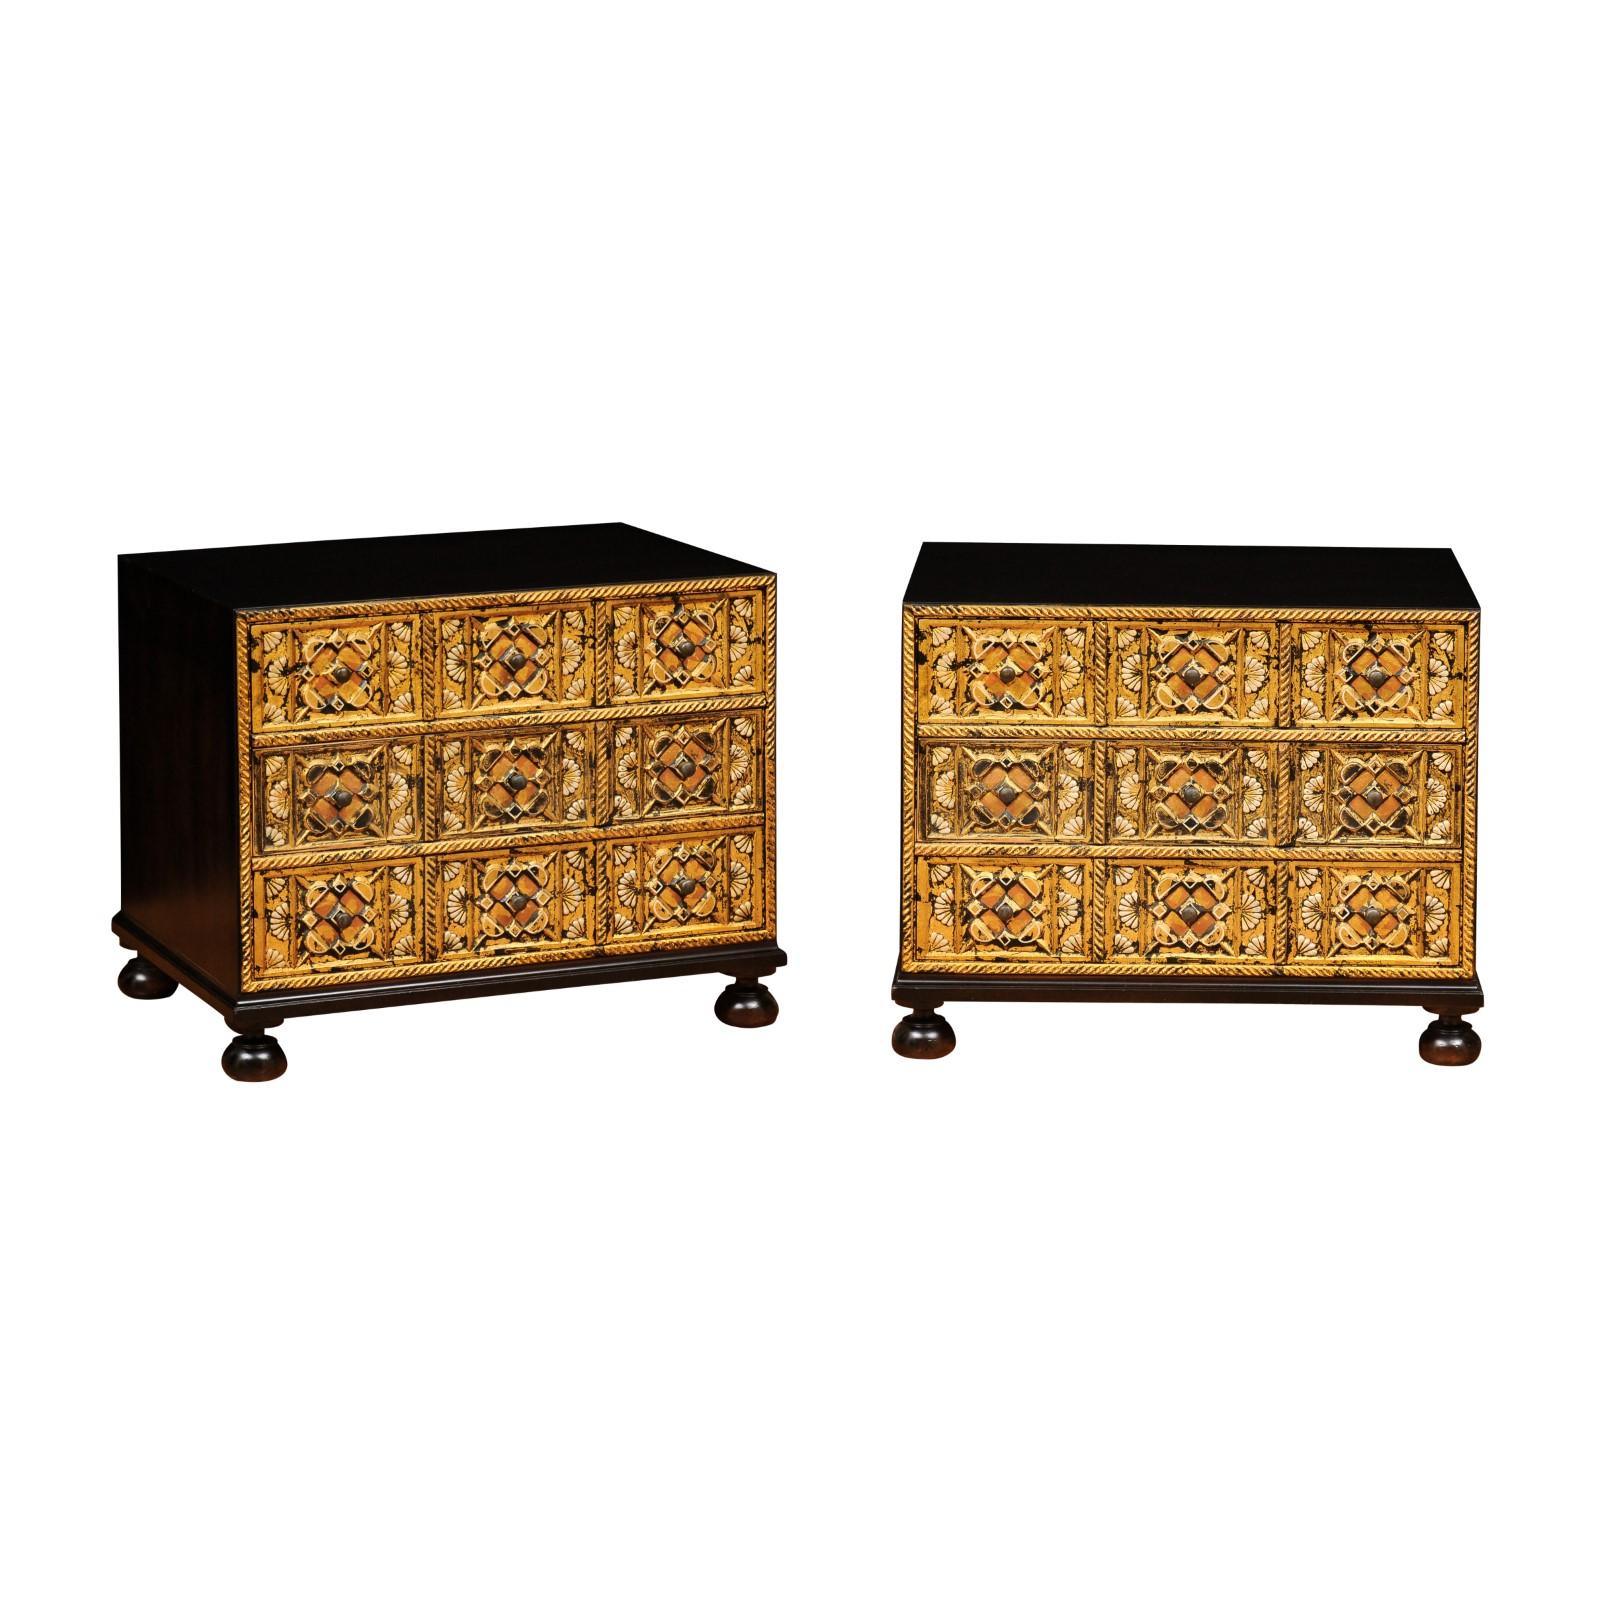 Gorgeous Restored Pair of Mediterranean Treasure Chests by Widdicomb, circa 1965 For Sale 11